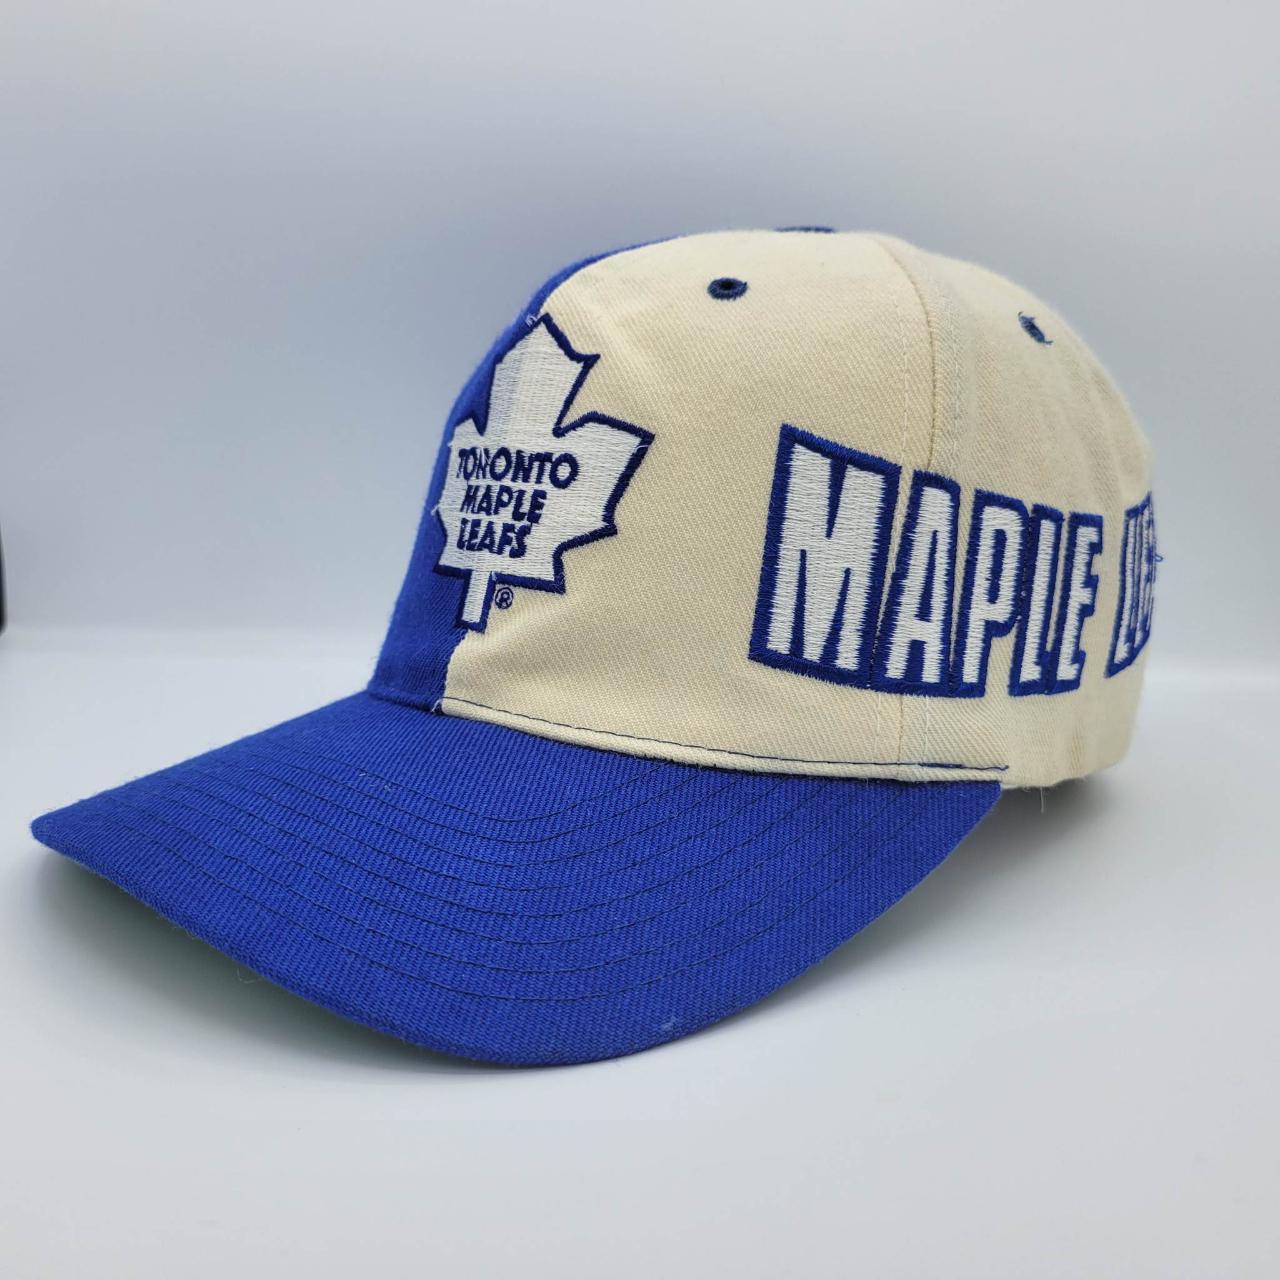 Vintage NIKE Toronto Maple Leafs Blue With Beige Leather 